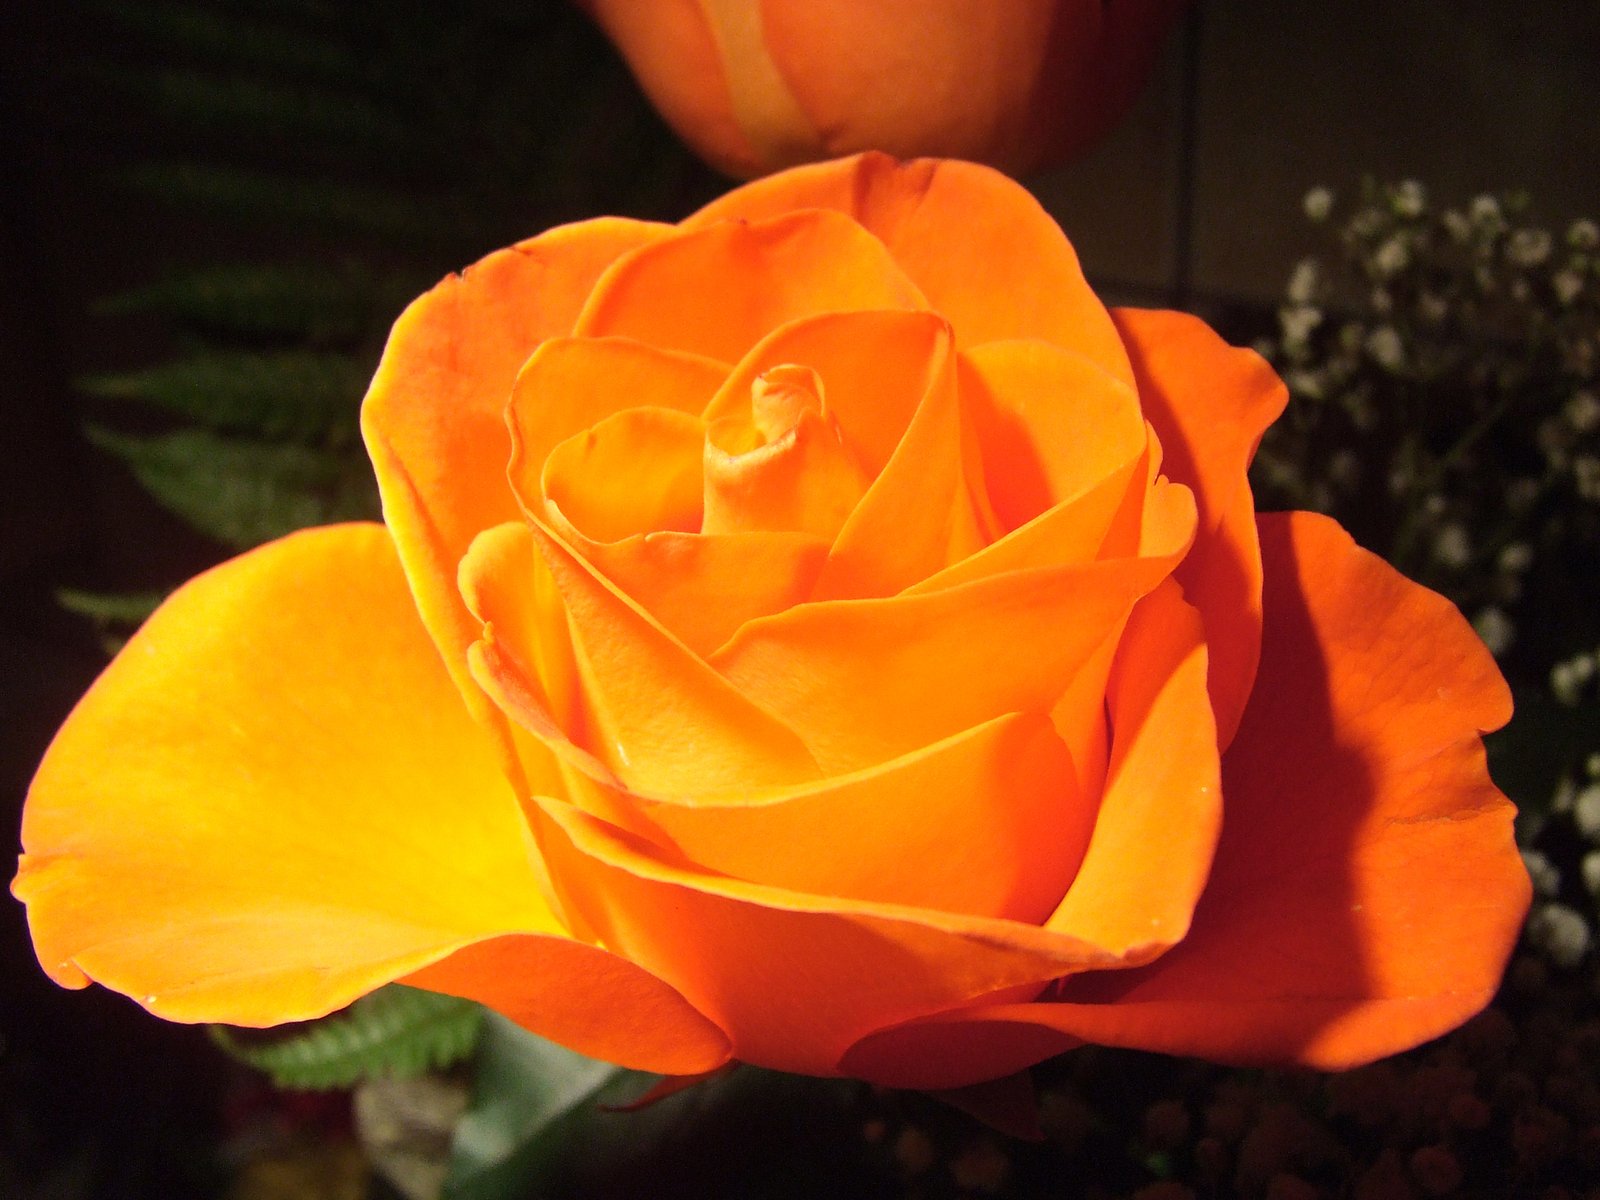 there is a large orange rose in the middle of the picture